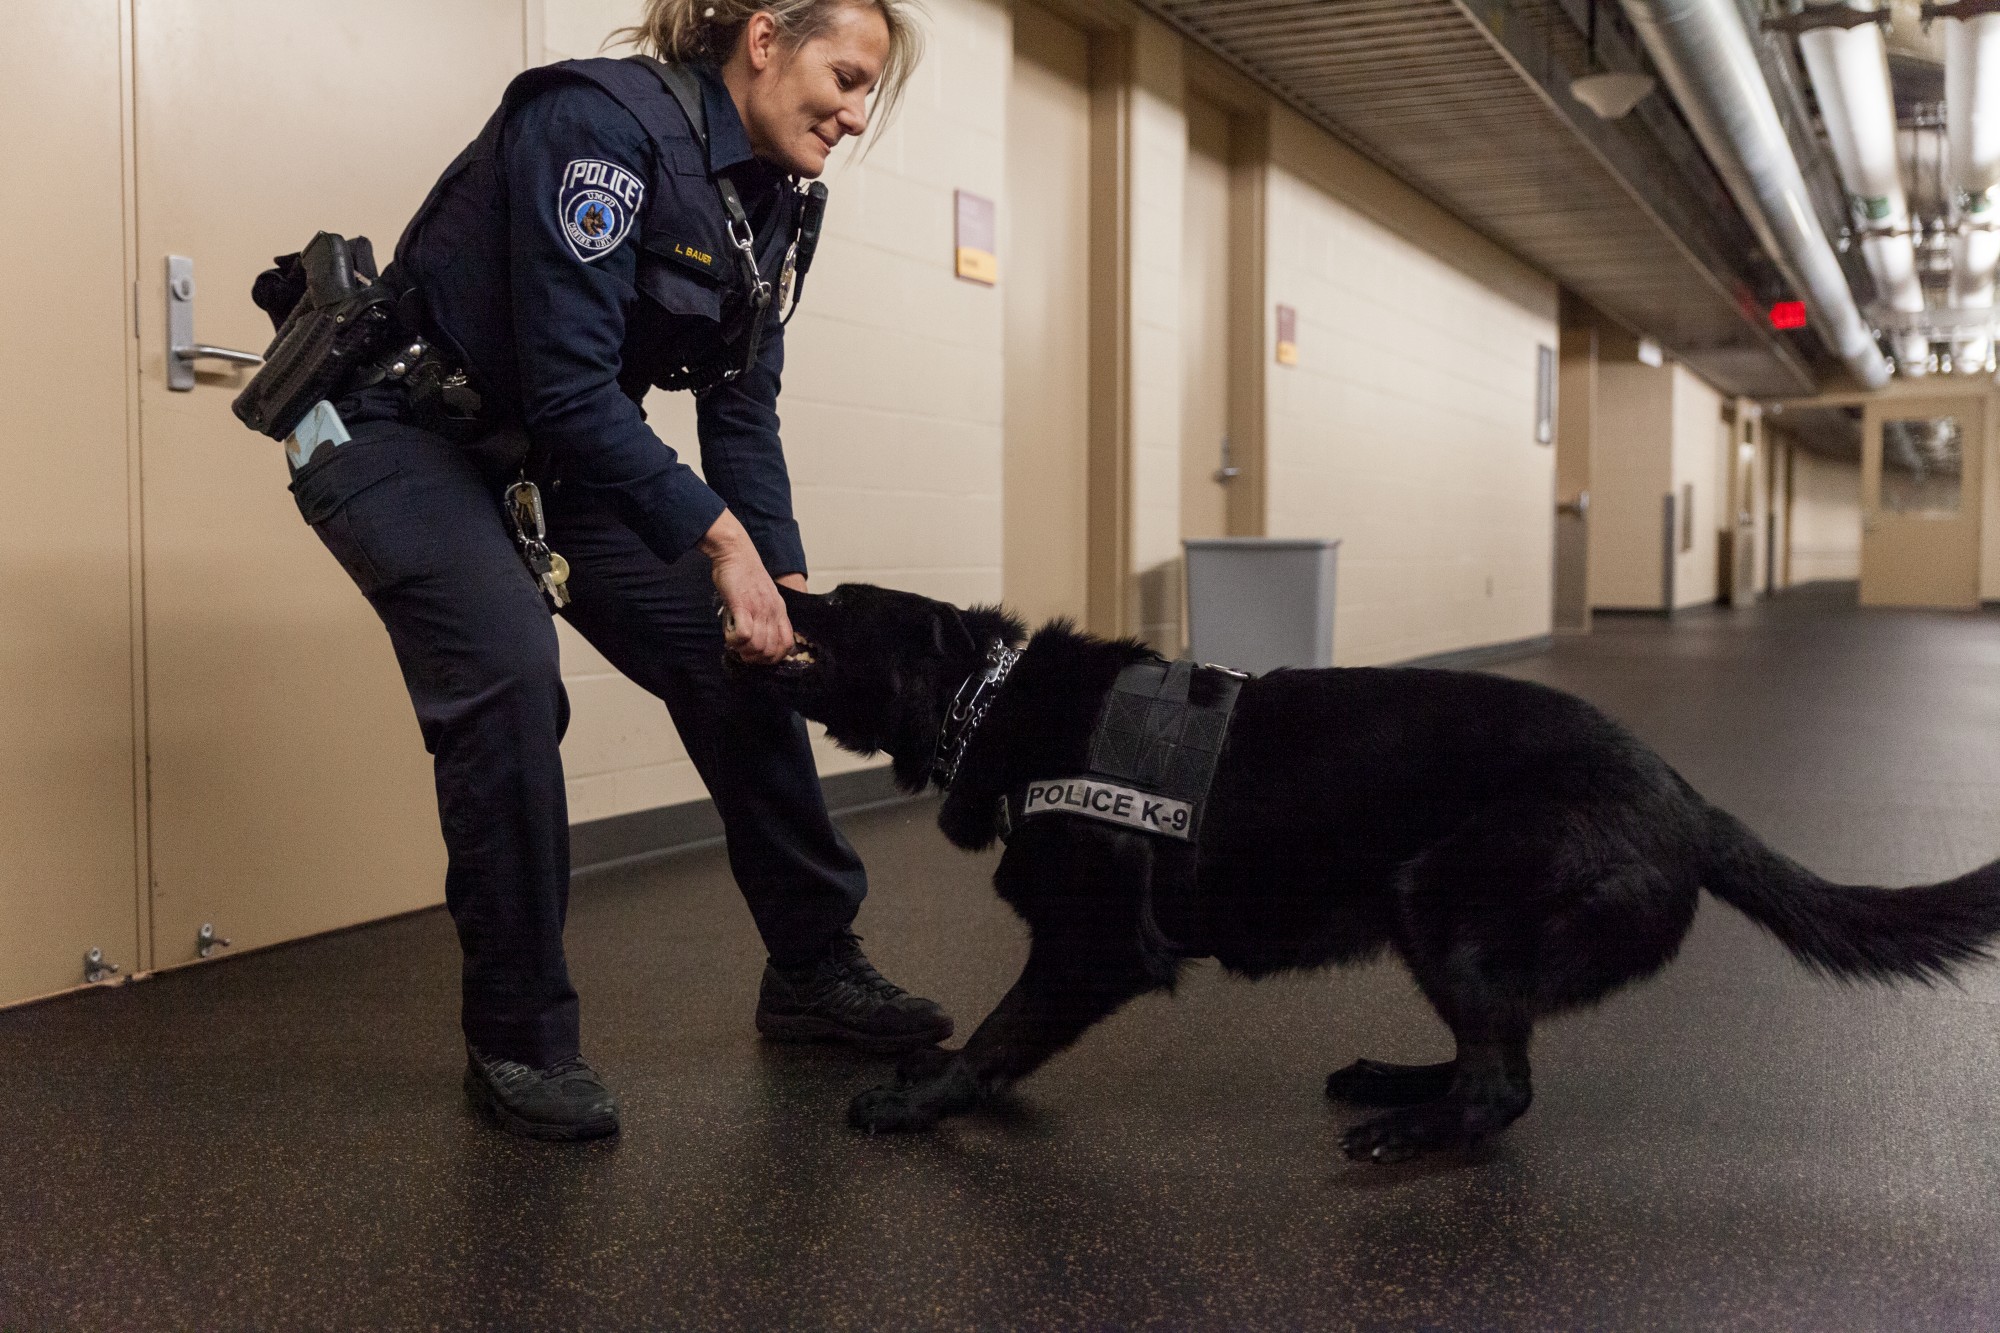 K-9 Patrol Officer Lara Bauer rewards her dog Rio with a toy at TCF Bank Stadium on Tuesday, Feb. 25. For Rio, this toy is the primary motivation for performing the tasks Bauer gives him.